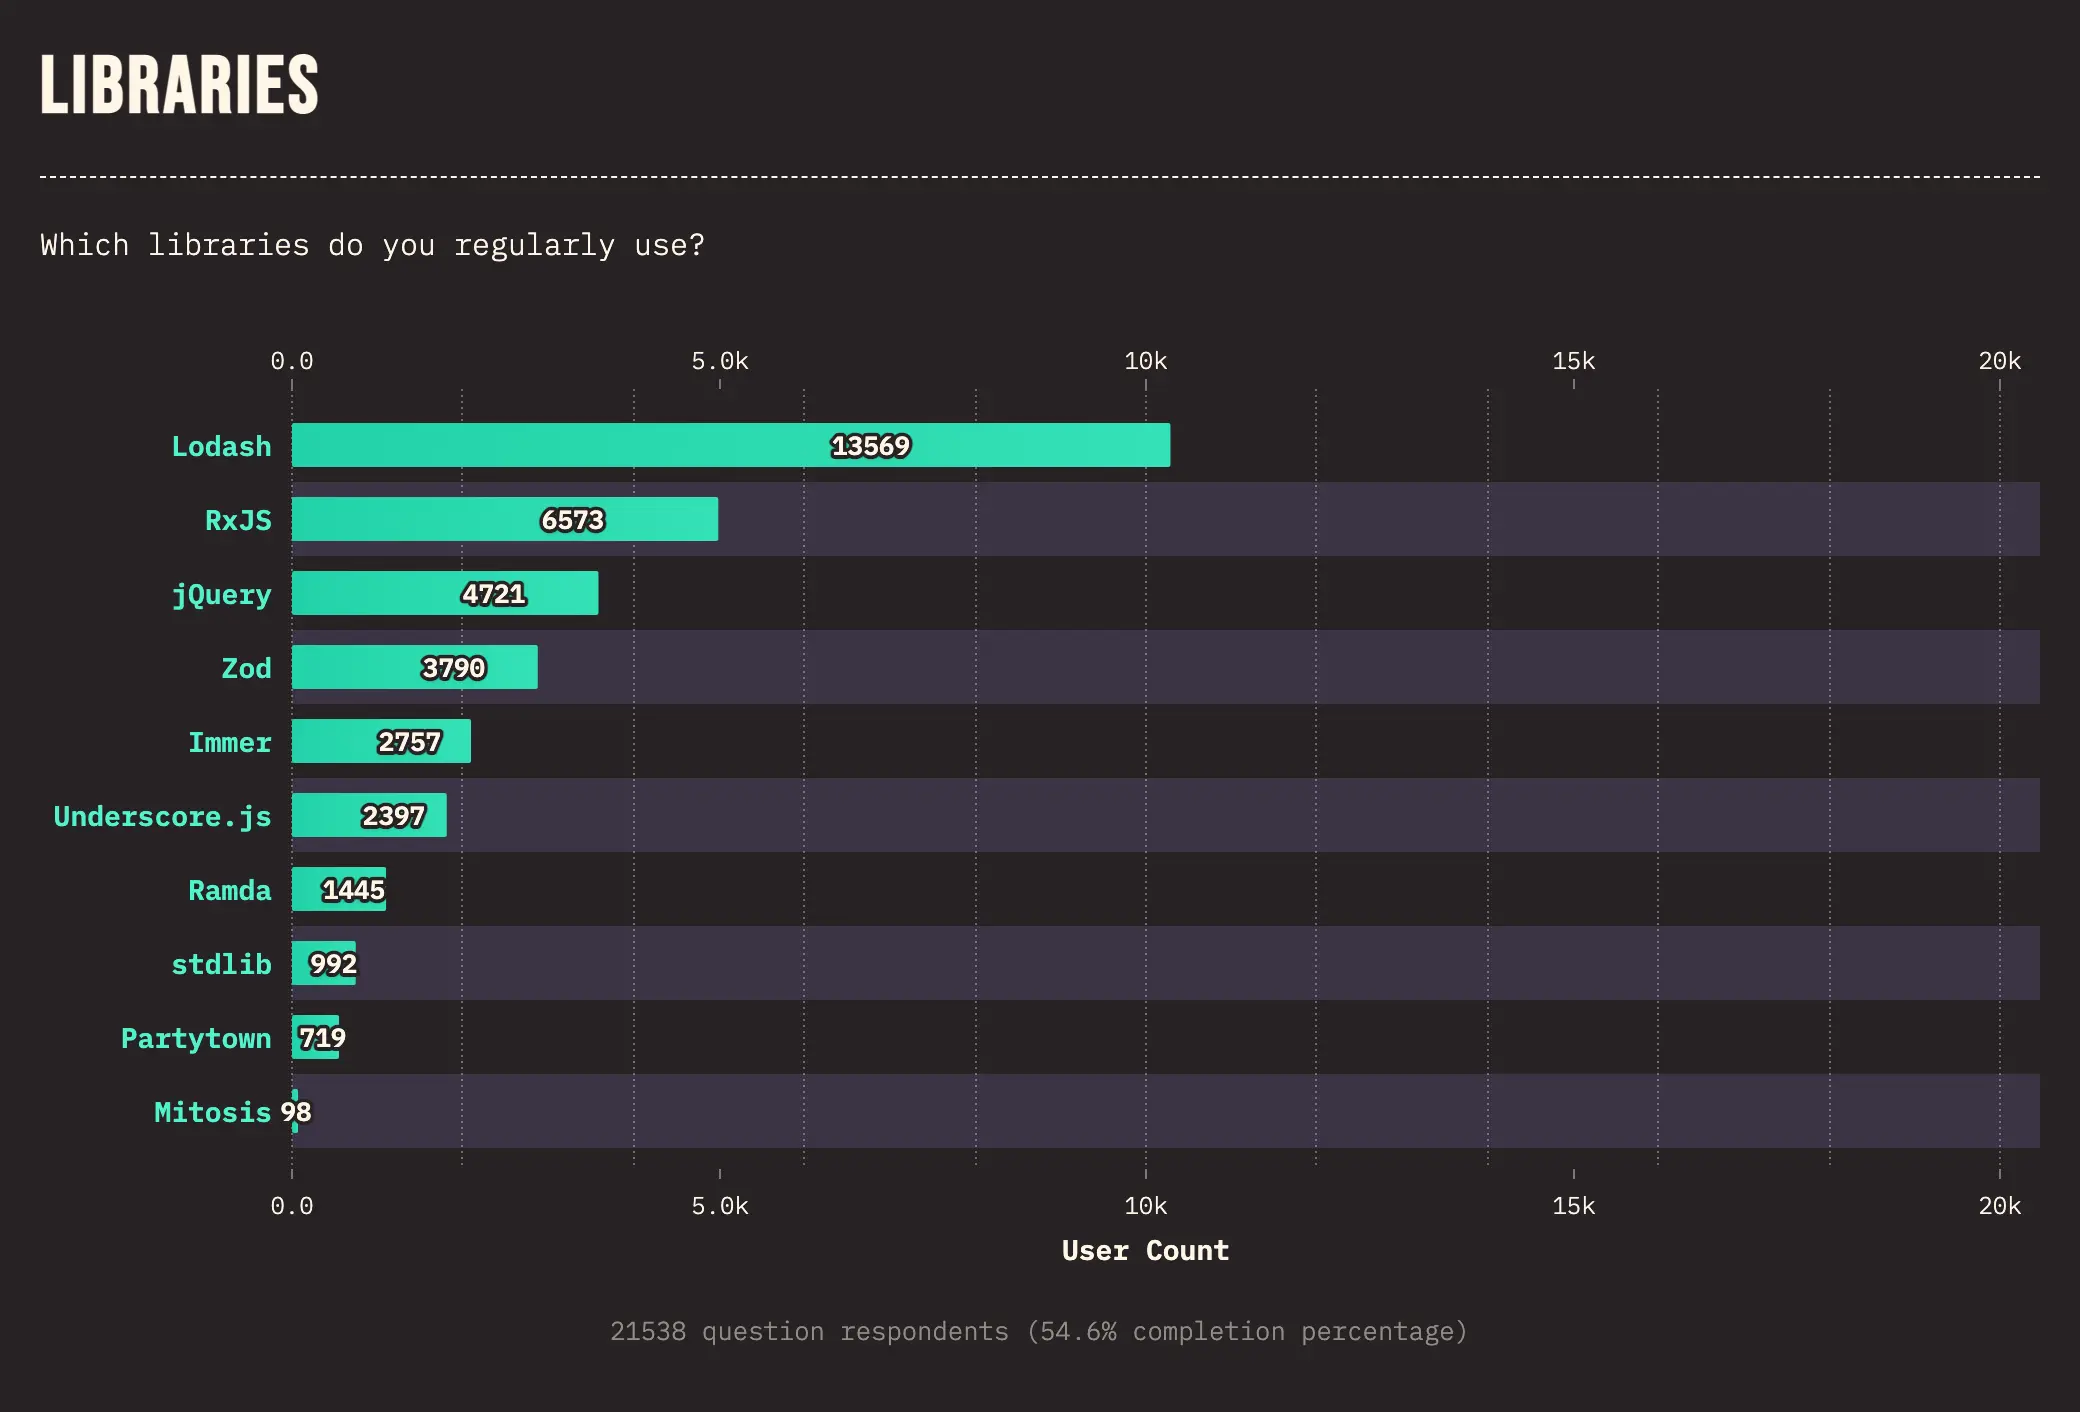 jquery is third most used javascript library 
